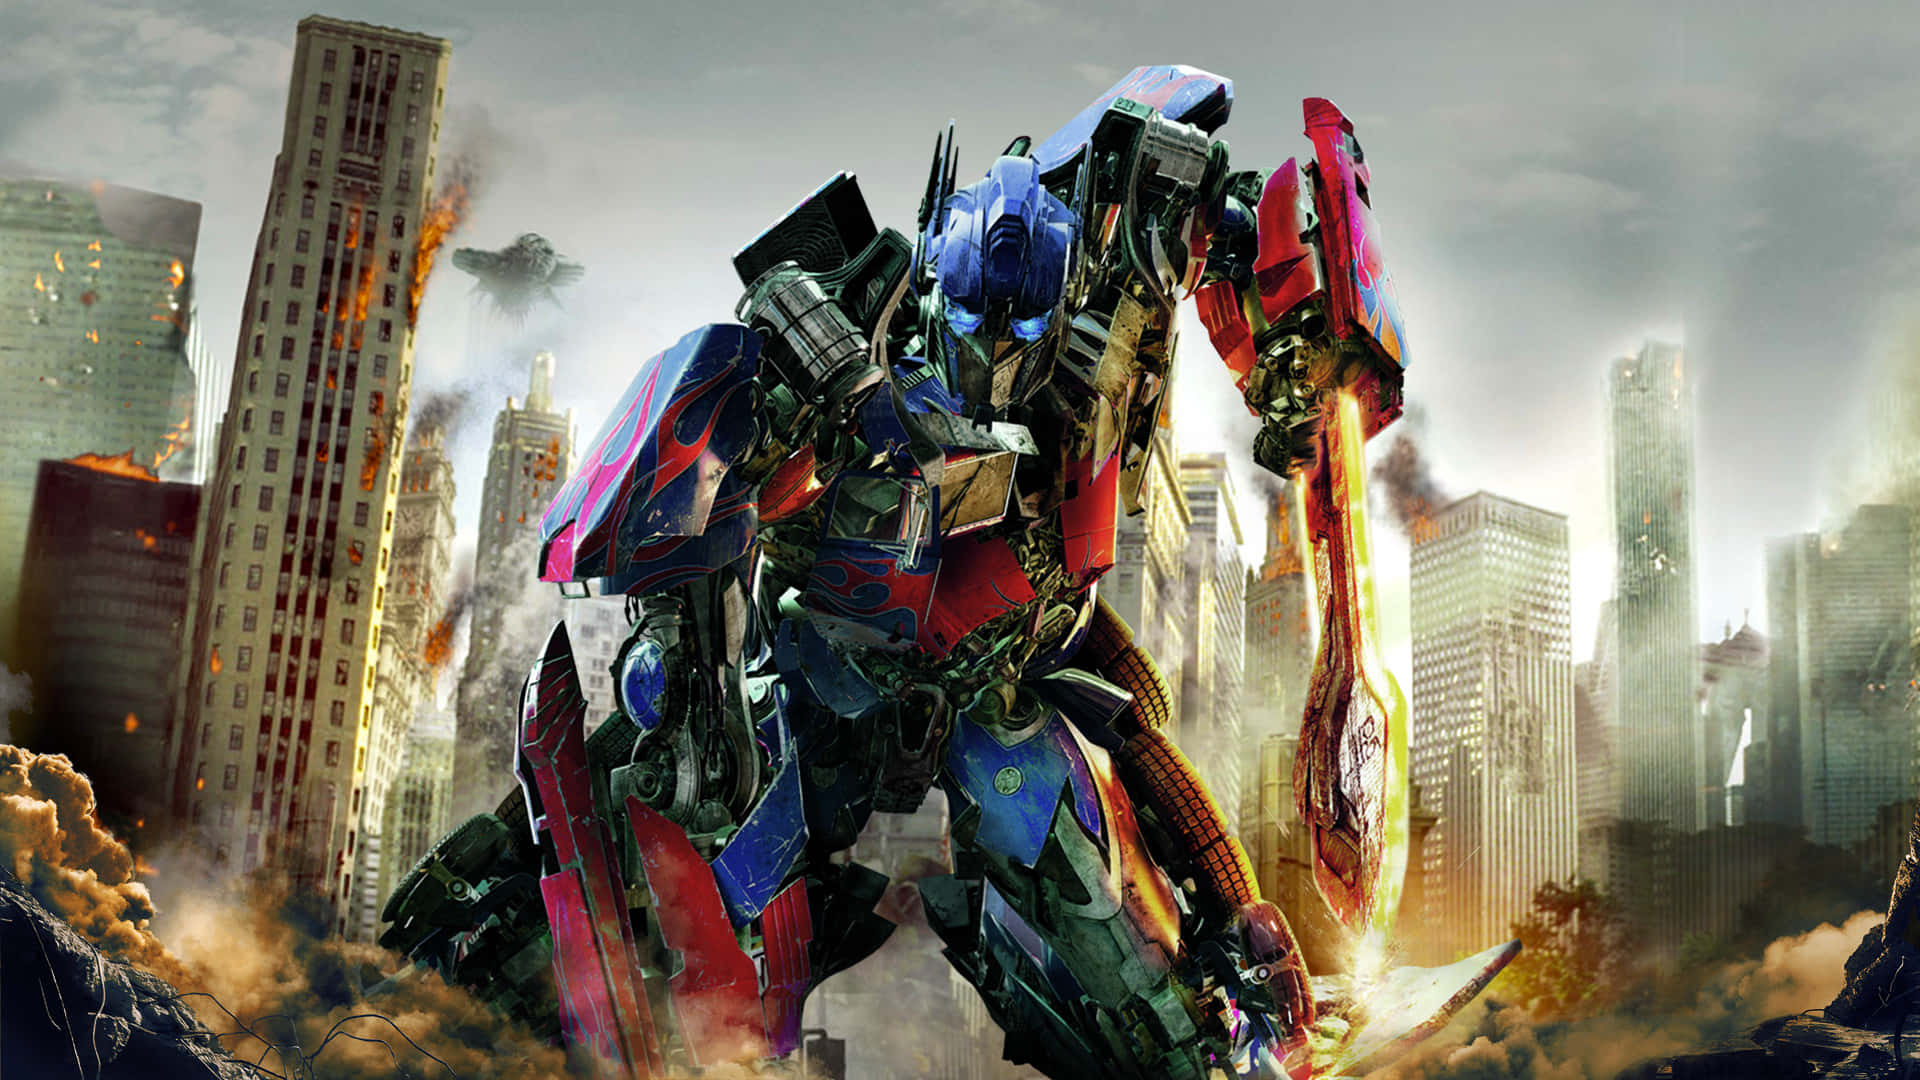 The Action-Packed Cinema Franchise, Transformers